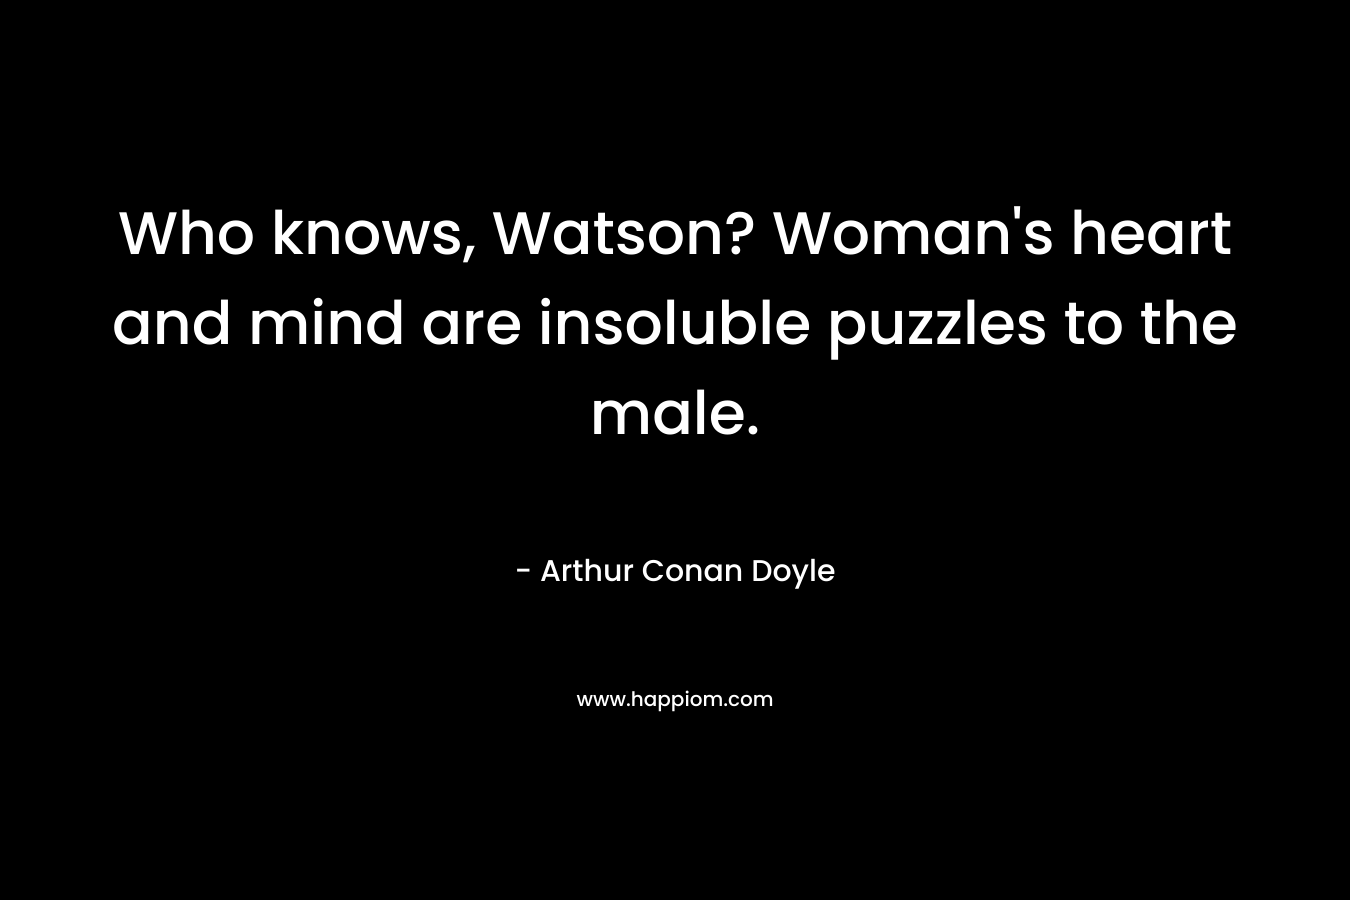 Who knows, Watson? Woman's heart and mind are insoluble puzzles to the male.